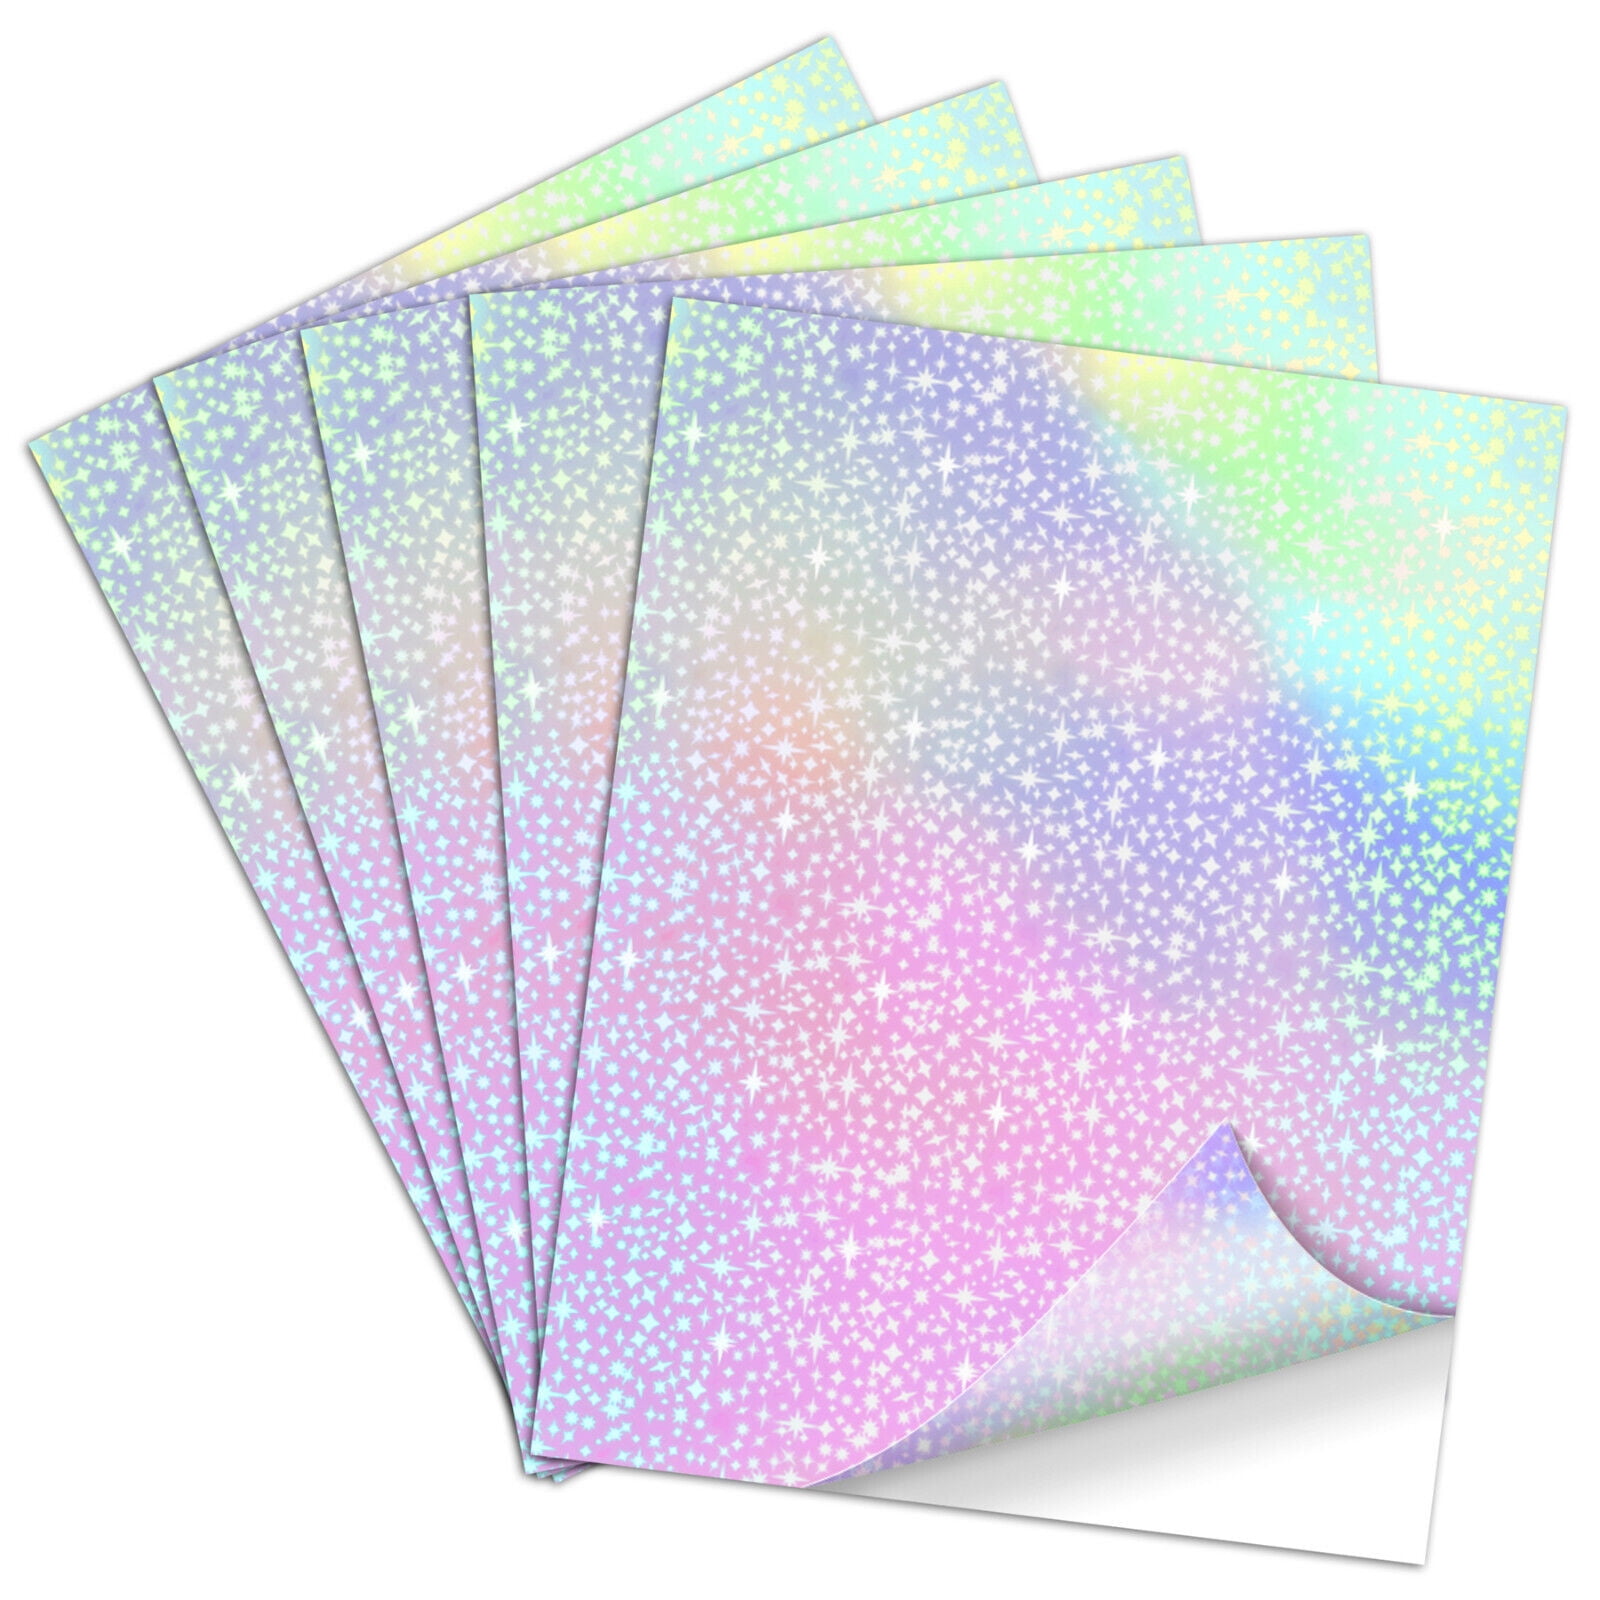 24 Sheets Holographic Laminate Sheets, Holographic Sticker Paper, Nonprintable Clear Vinyl Overlay for Cricut, Stickers, Cards, Pictures, Photos